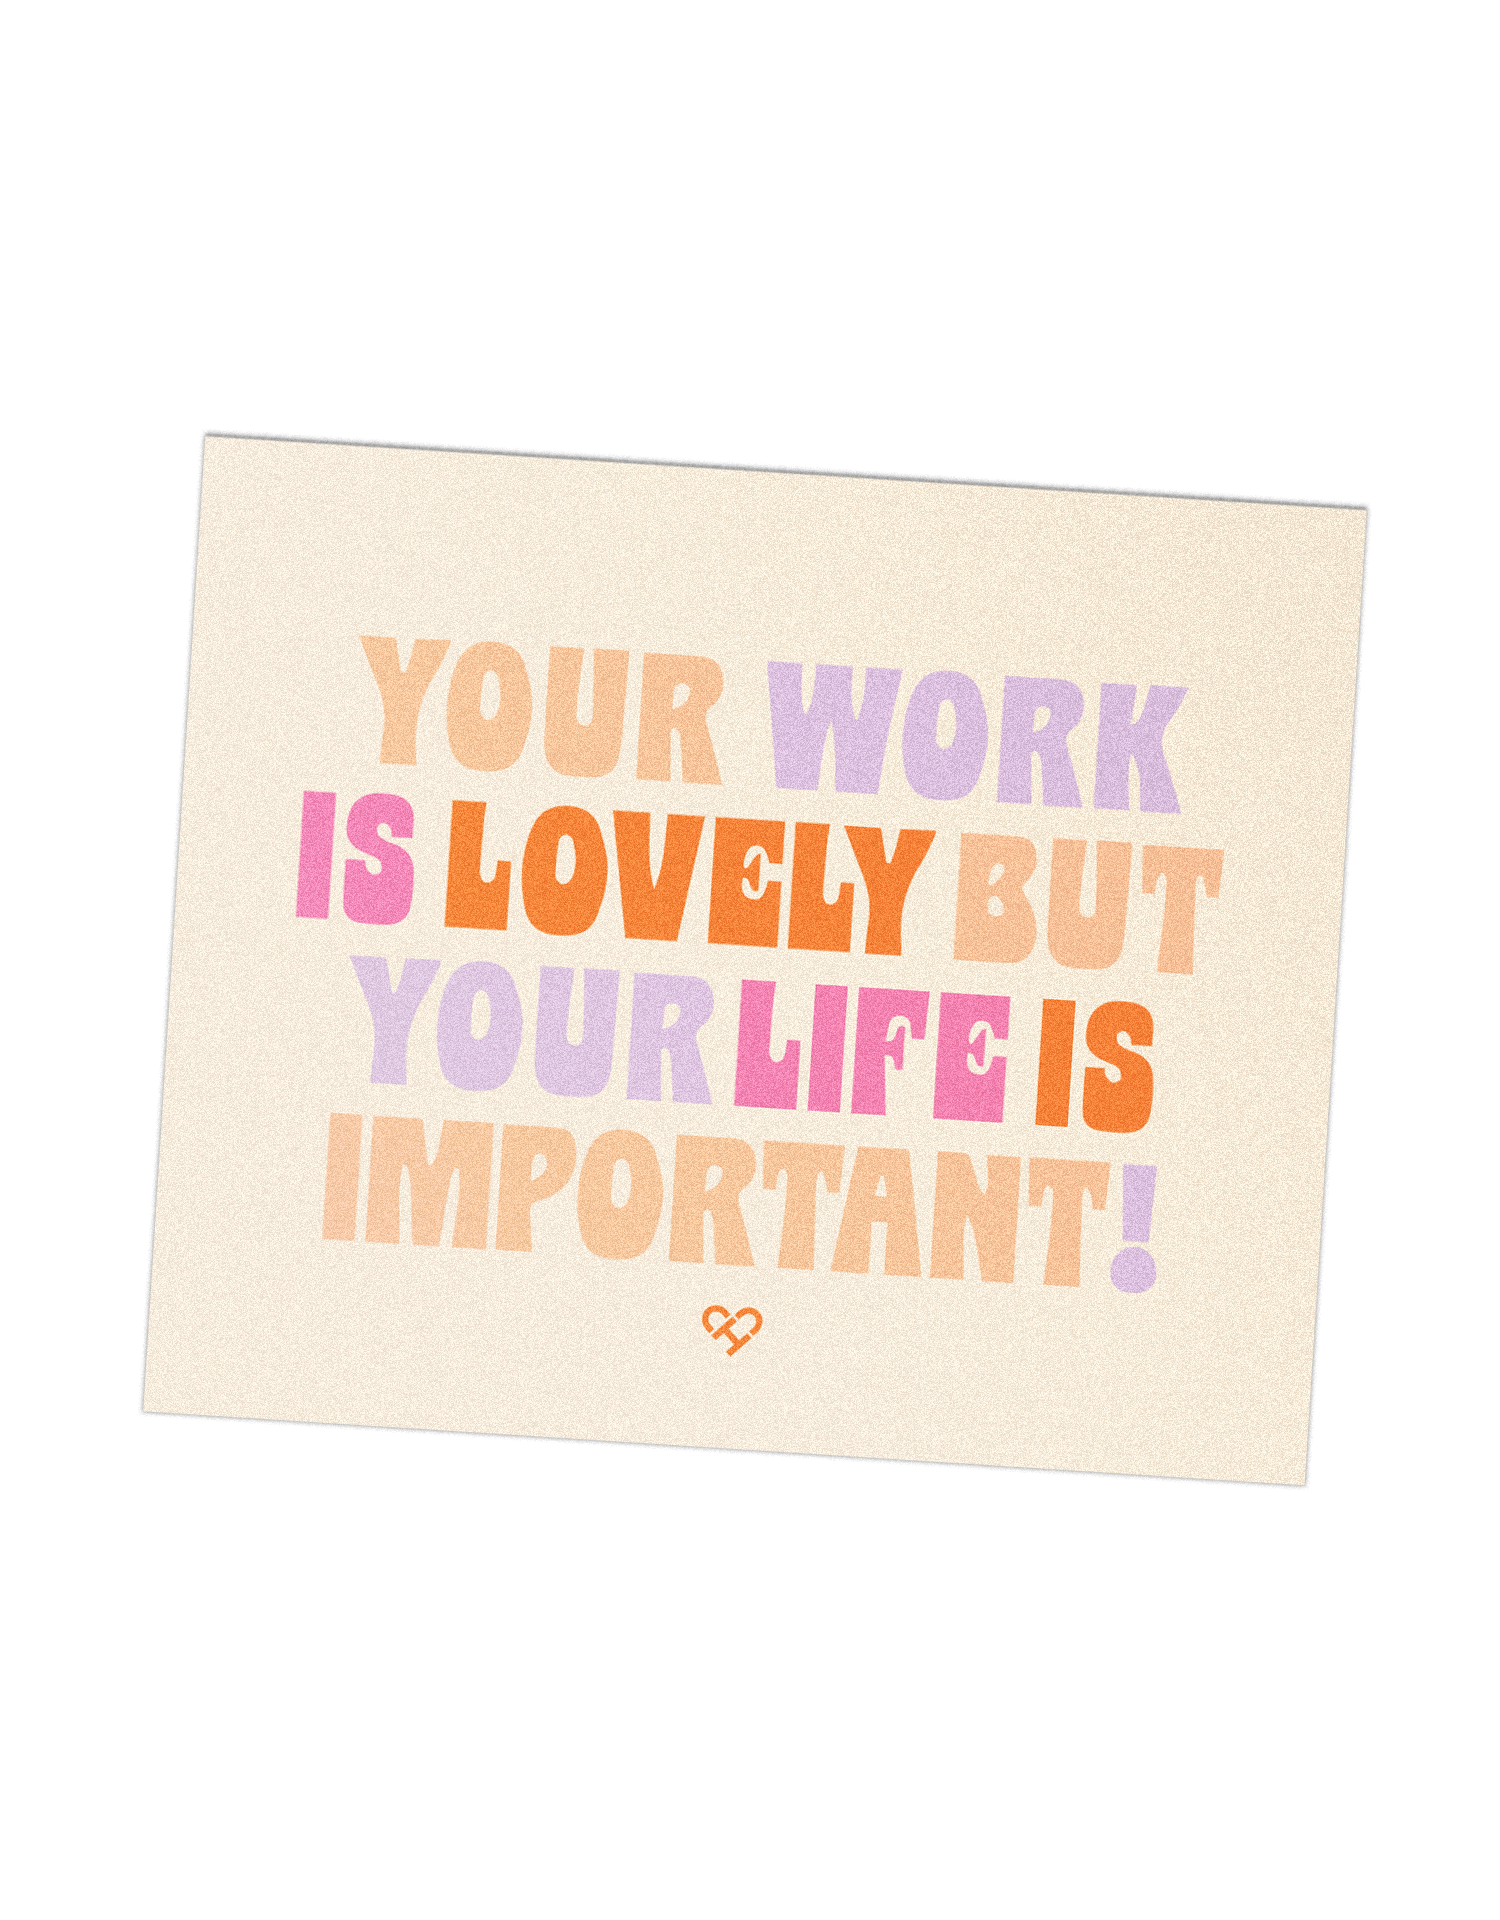 Work-is-lovely.png